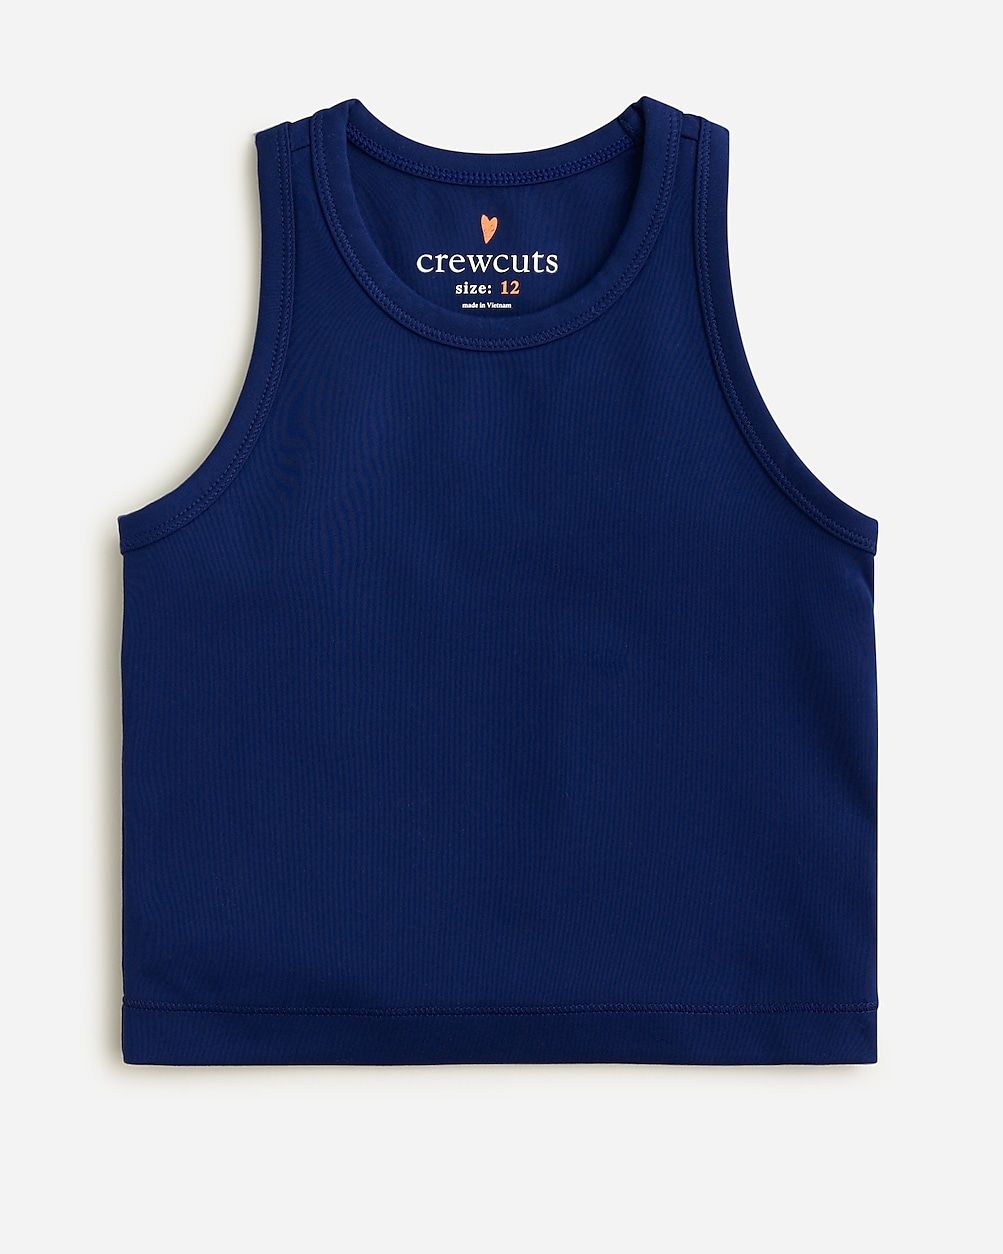 Girls' active cropped tank top | J.Crew US